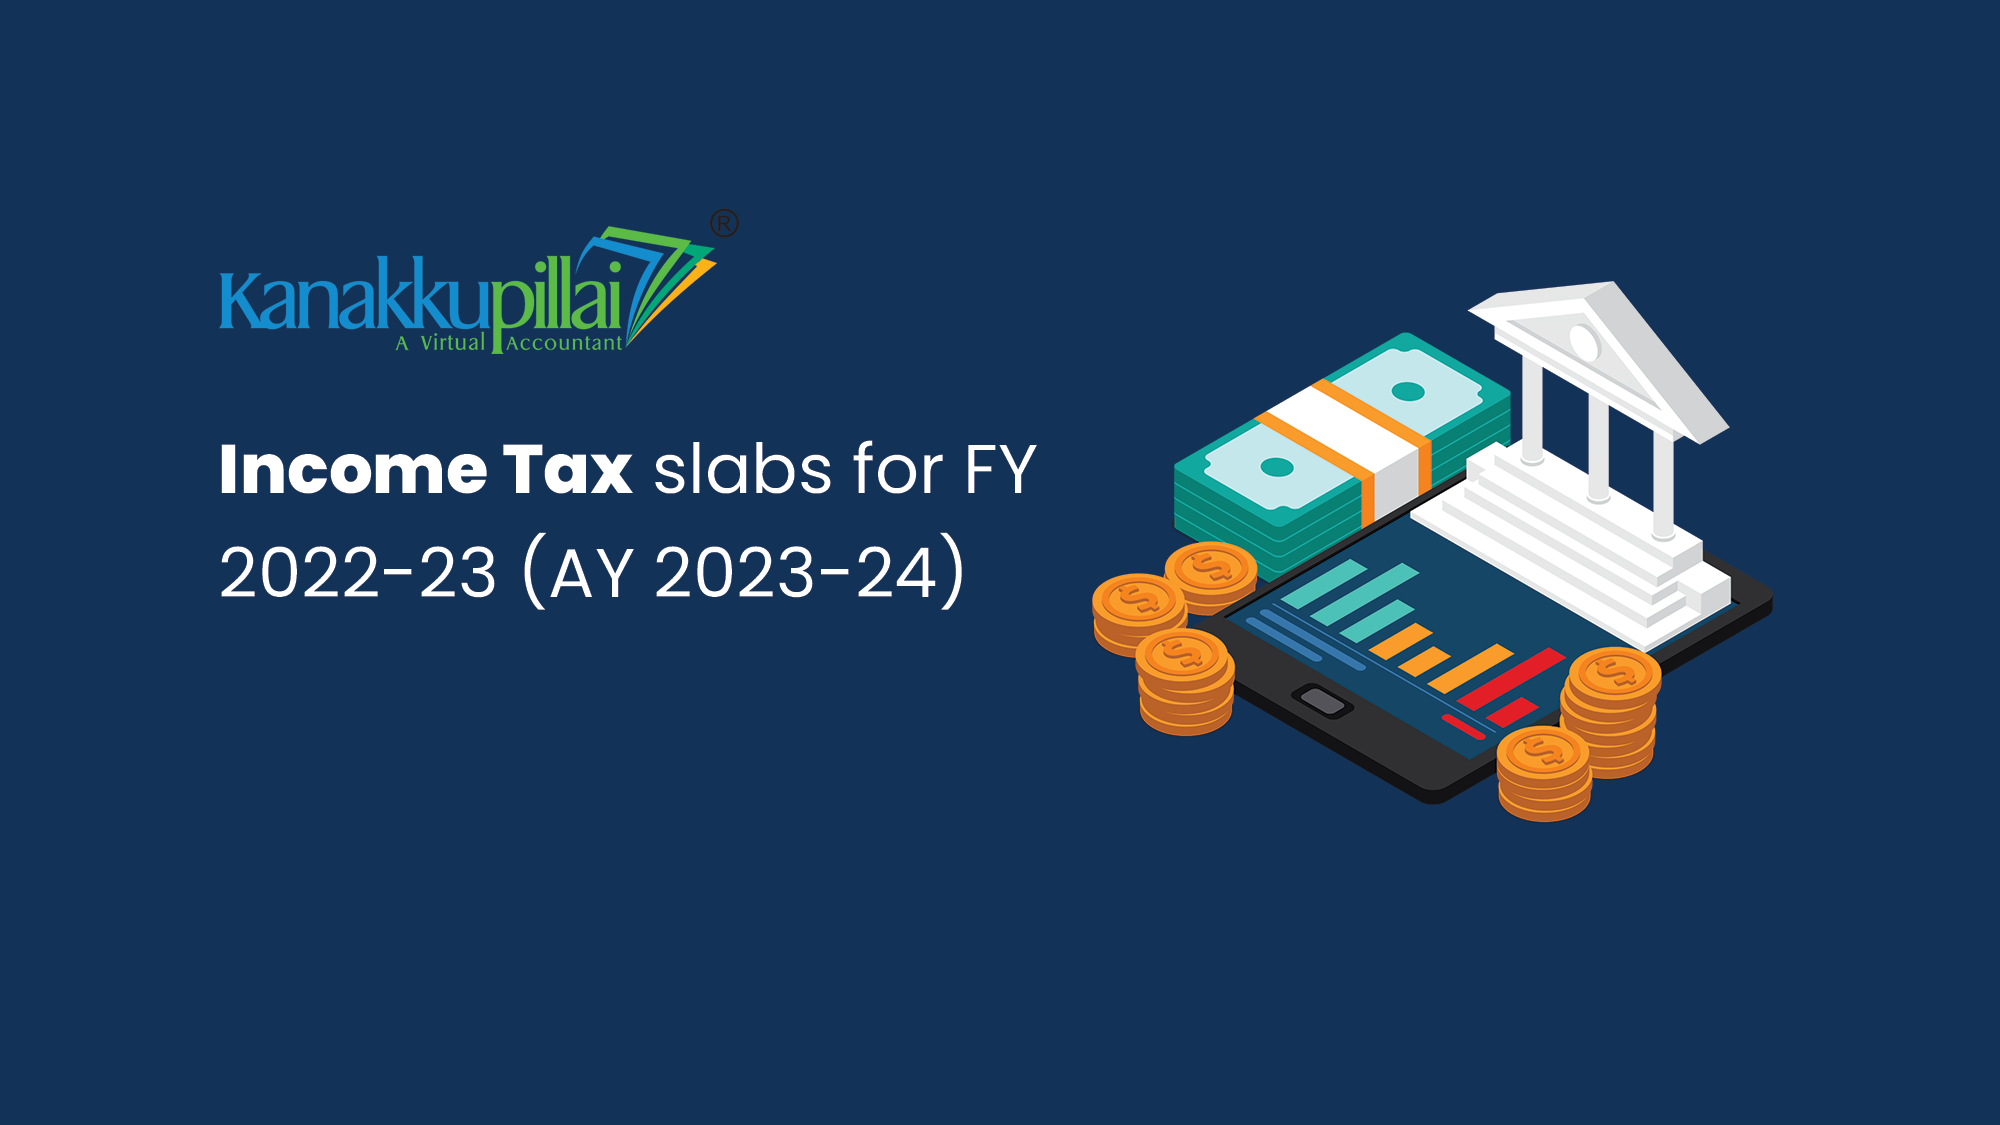 Income tax slabs for FY 2022-23 (AY 2023-24)